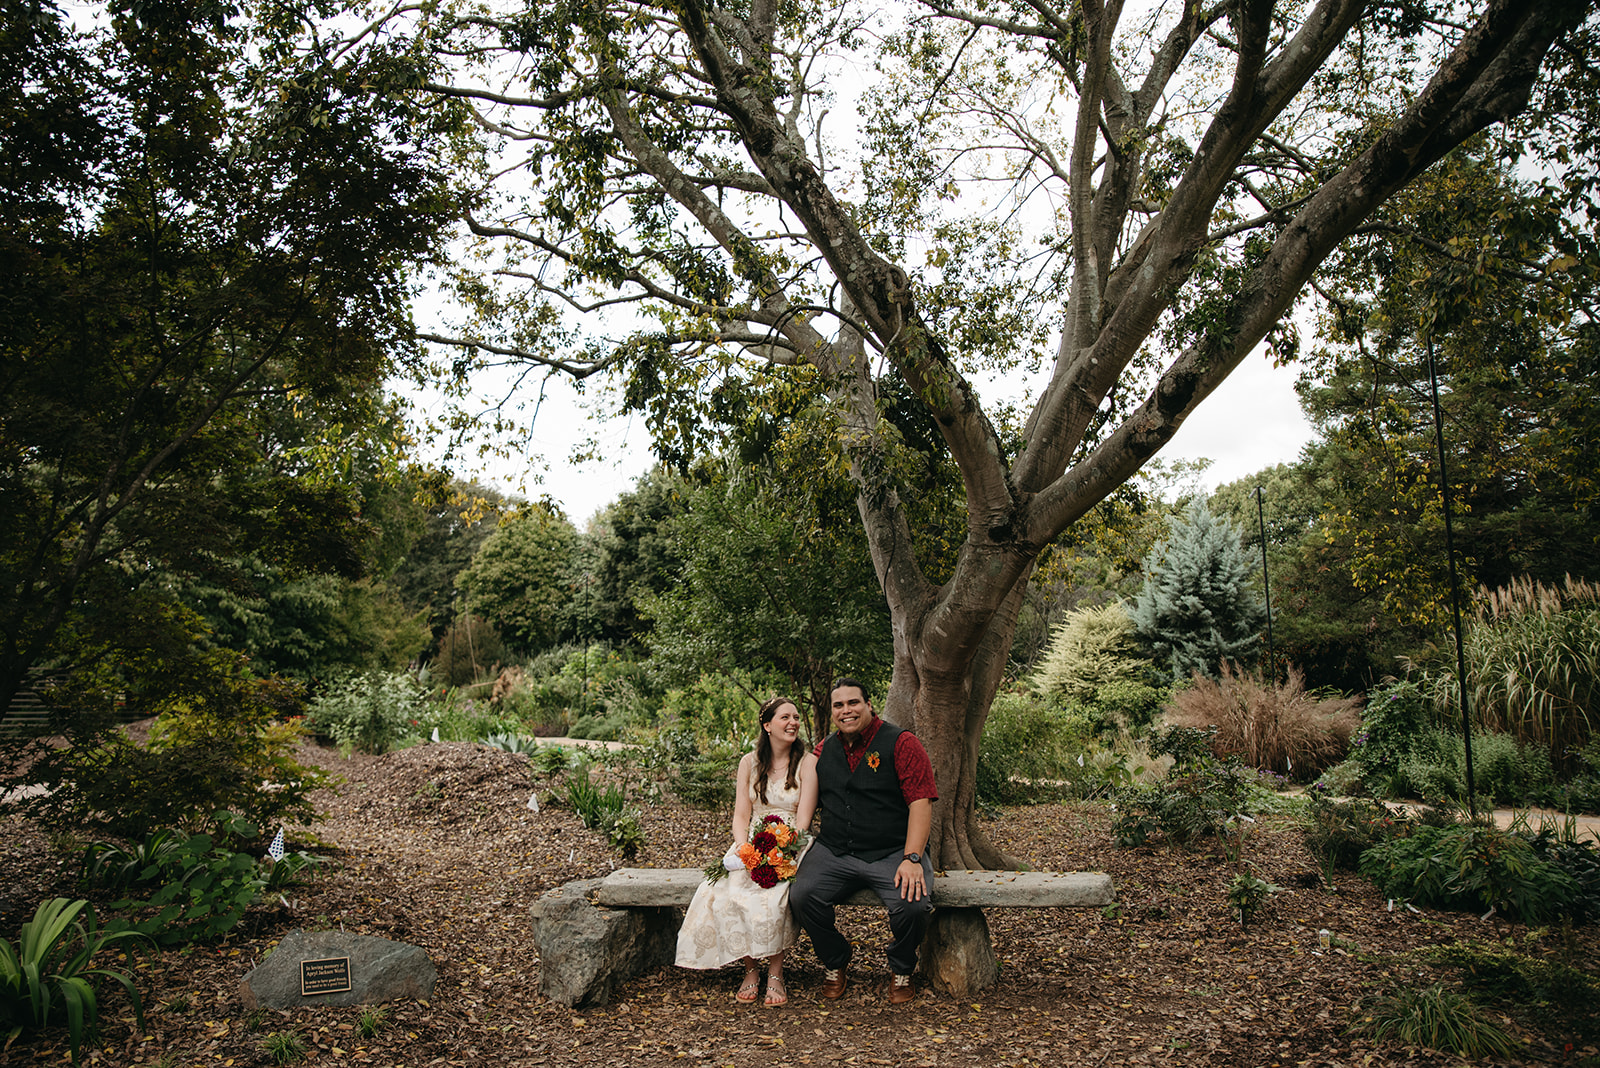 Intimate Wedding at JC Raulston Arboretum in Downtown Raleigh with Sam & Megan 